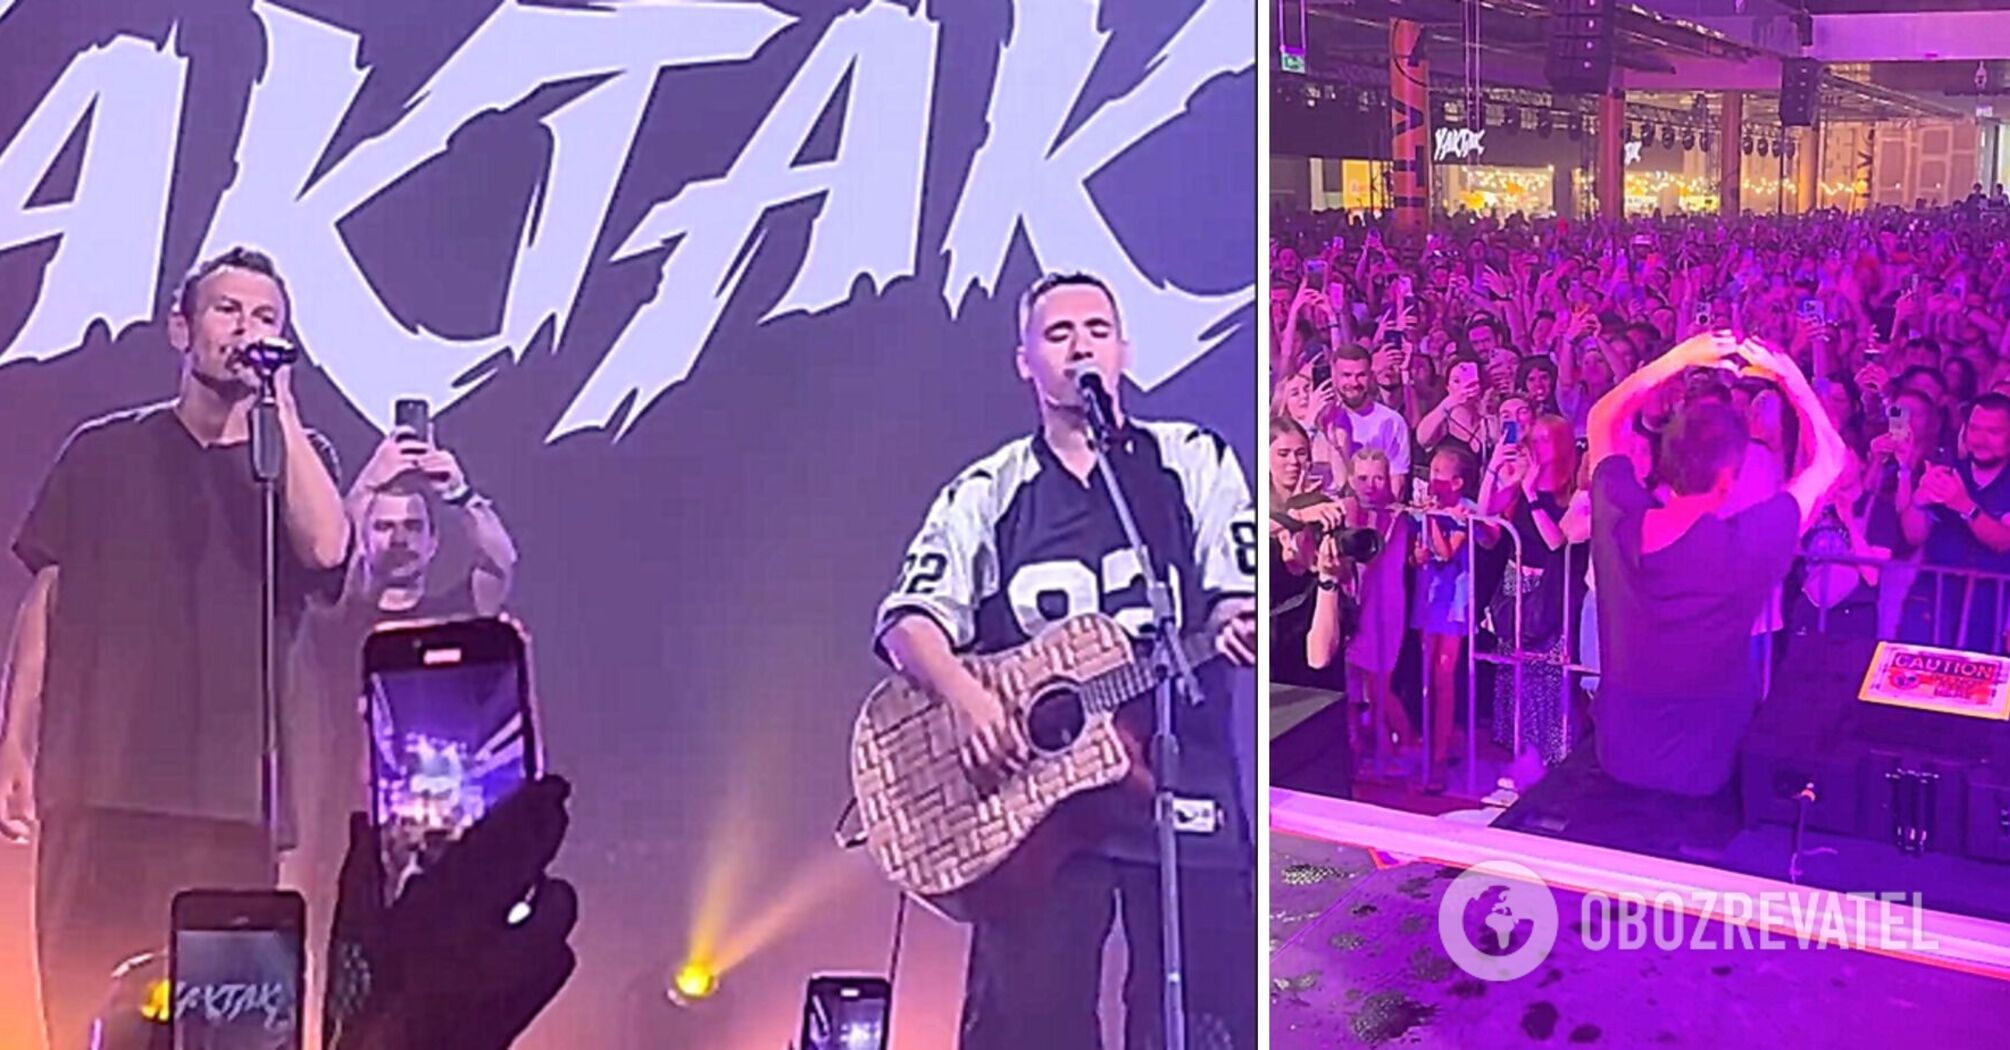 Two legends: Sviatoslav Vakarchuk and YAKTAK unexpectedly sang together and tore the hall apart. Video